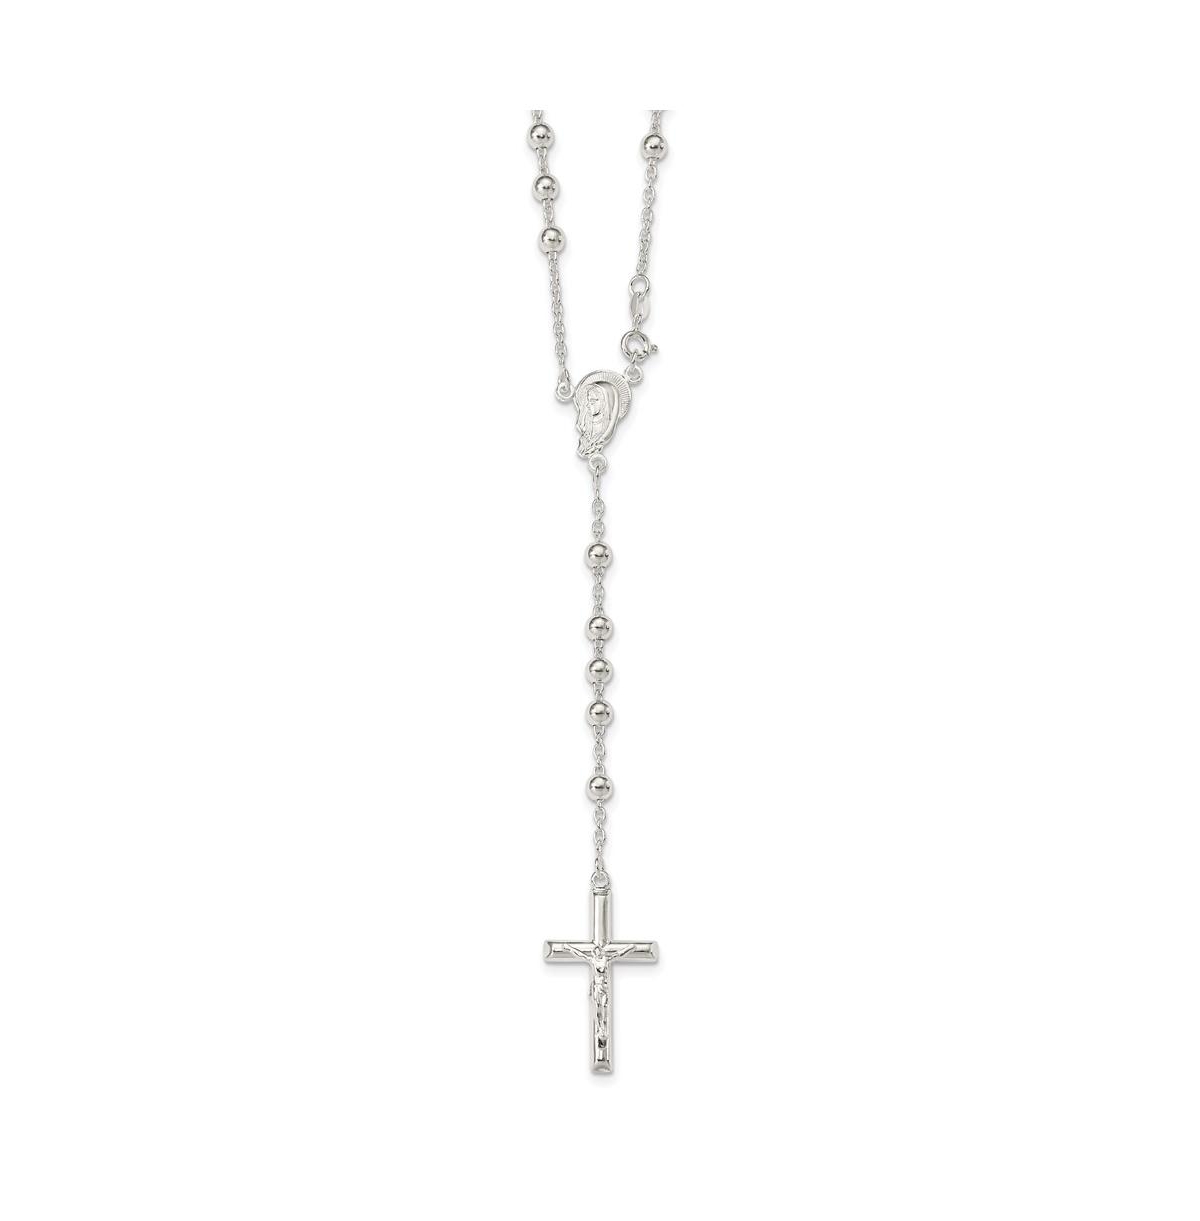 Sterling Silver Polished Beaded Rosary Pendant Necklace 30" - Silver